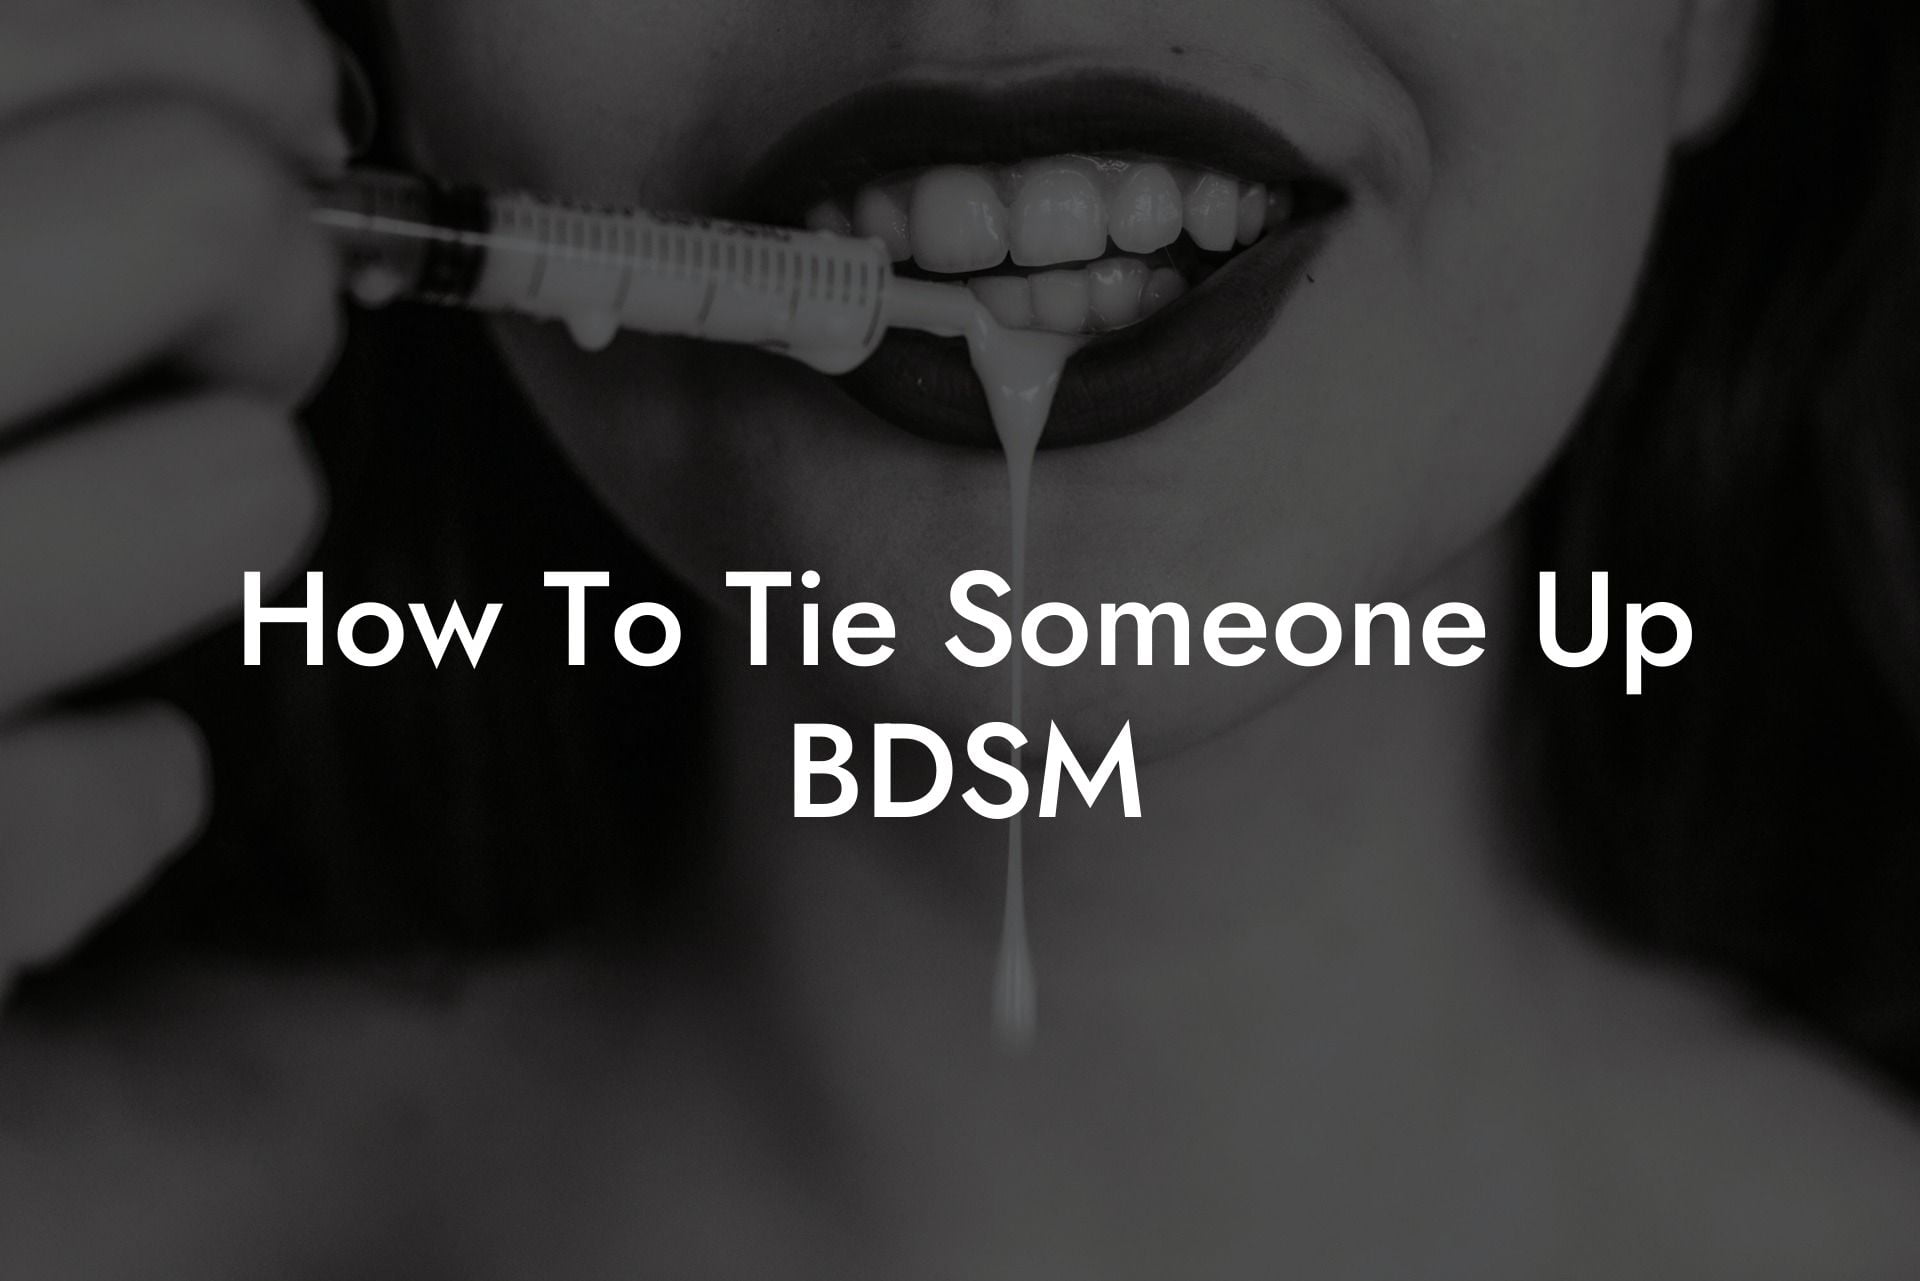 How To Tie Someone Up BDSM